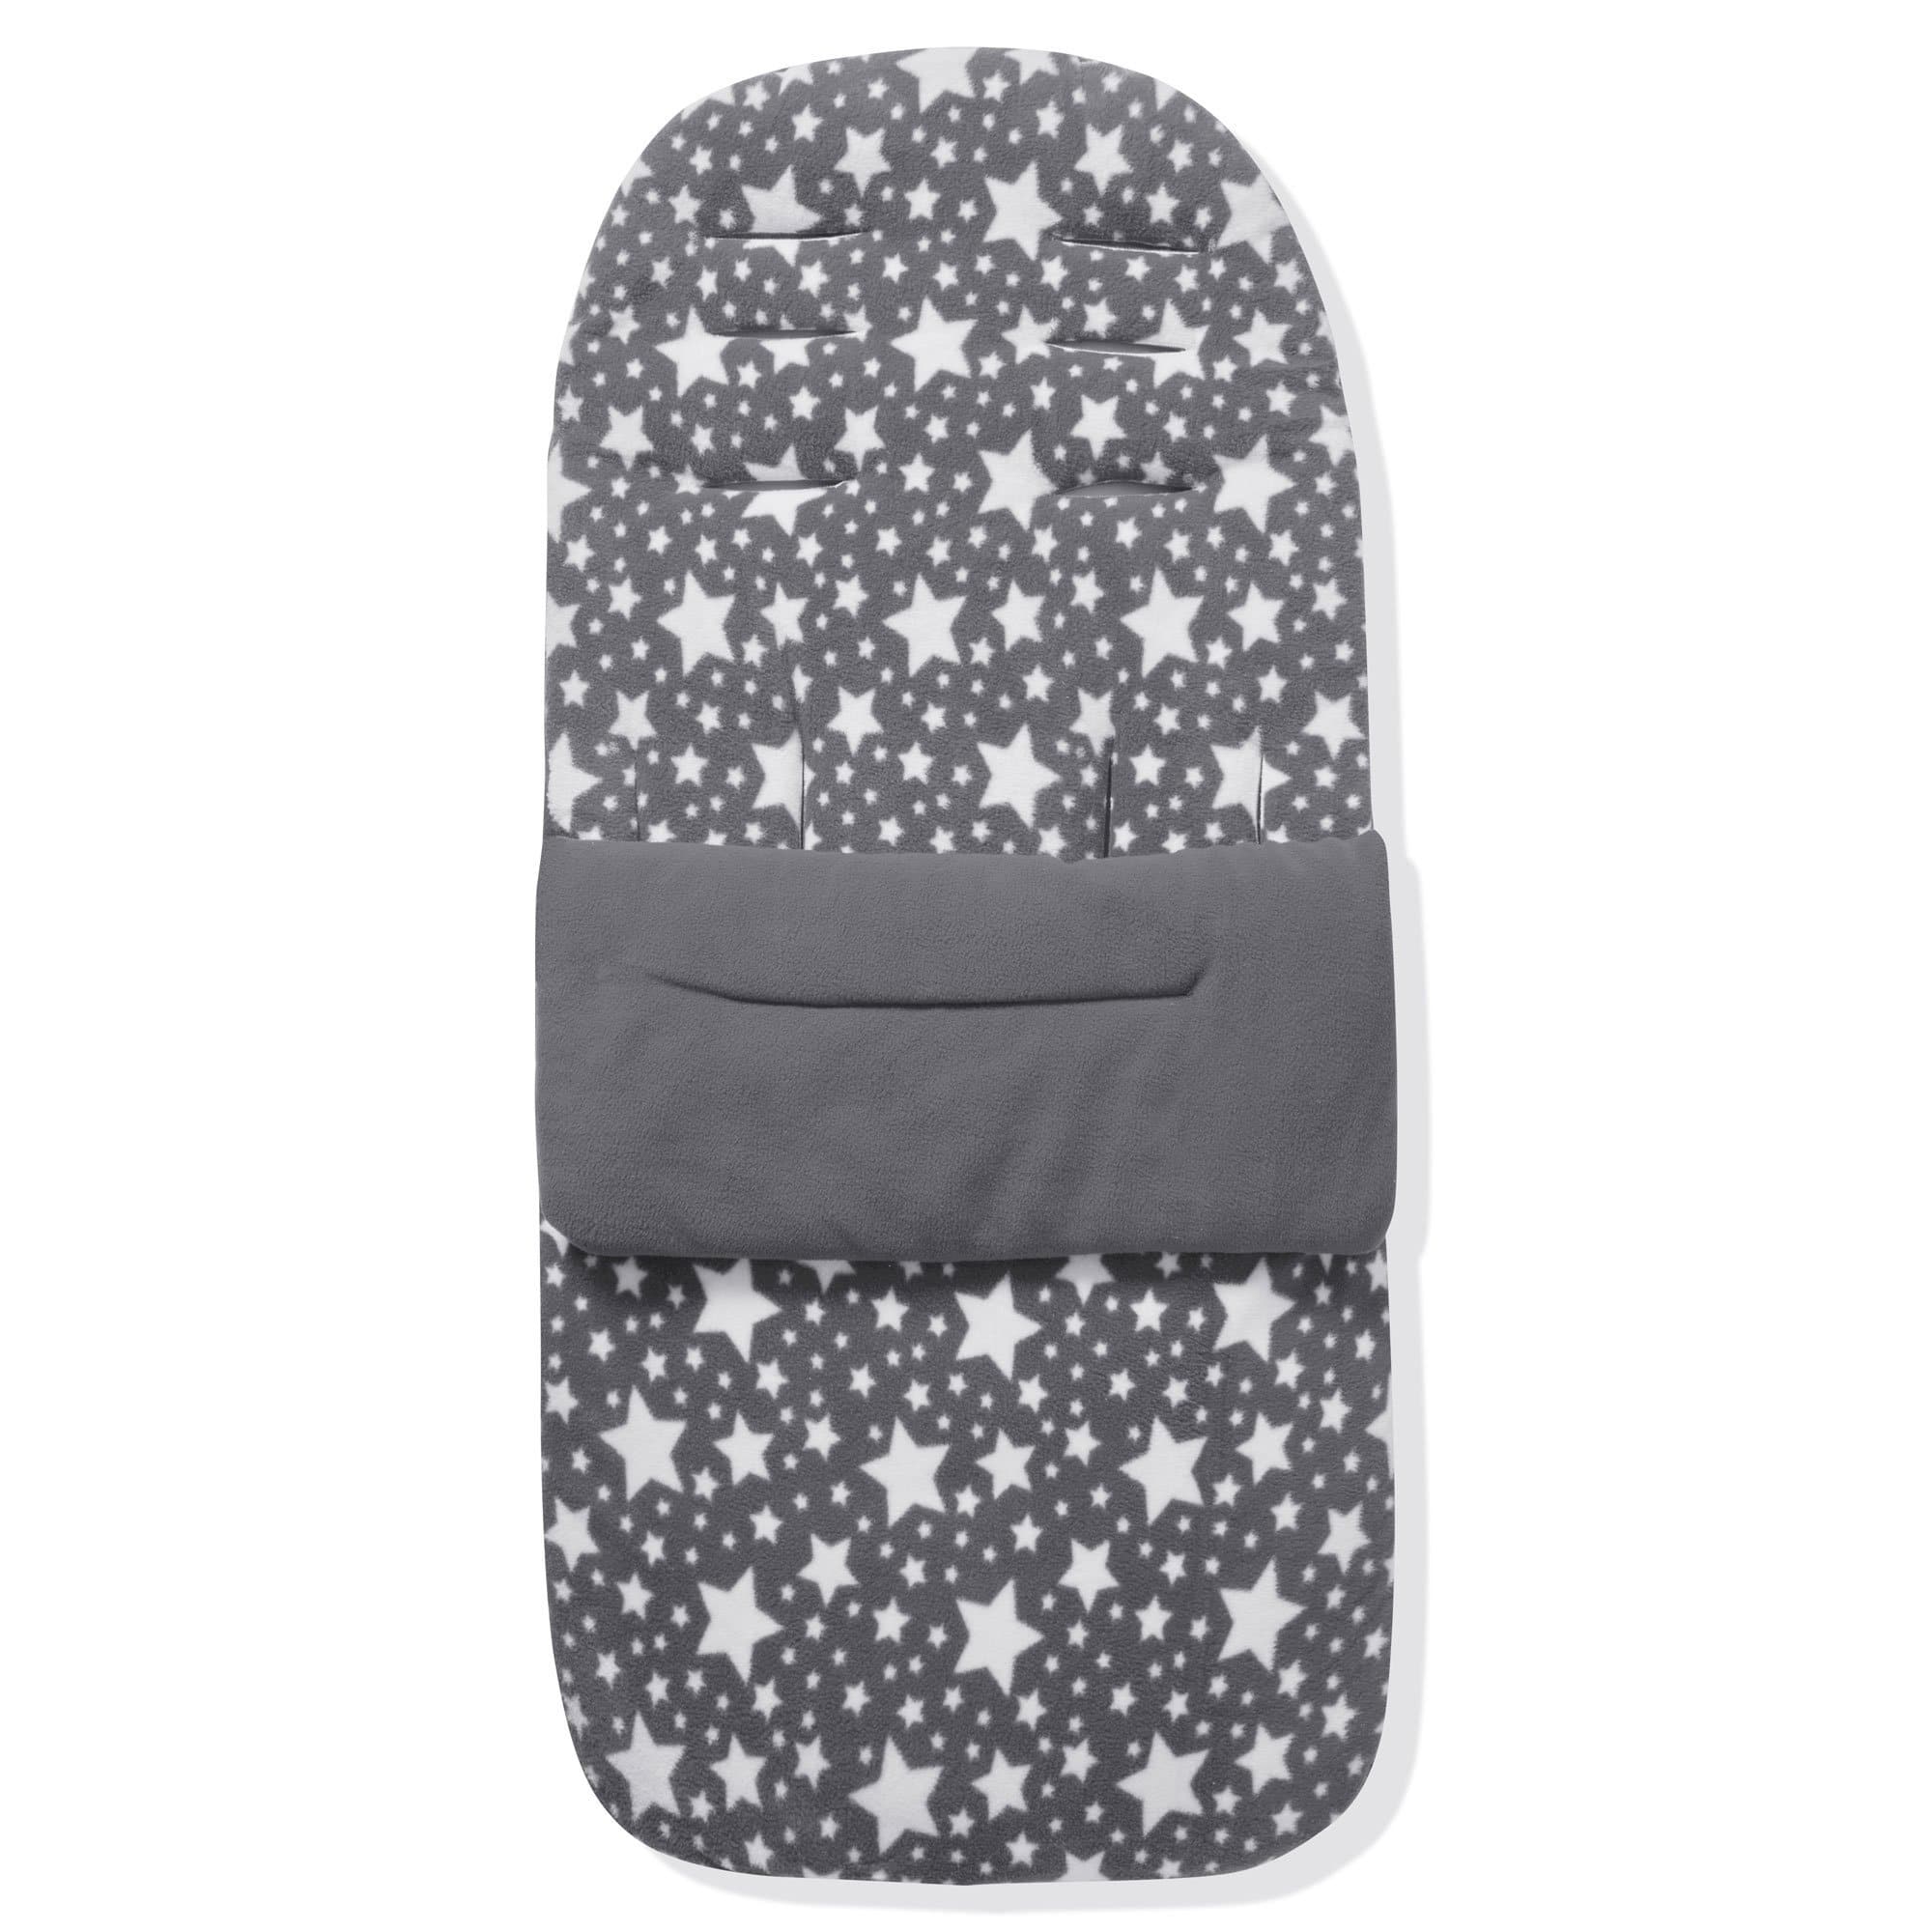 Fleece Footmuff / Cosy Toes Compatible with BabyDan - Grey Star / Fits All Models | For Your Little One